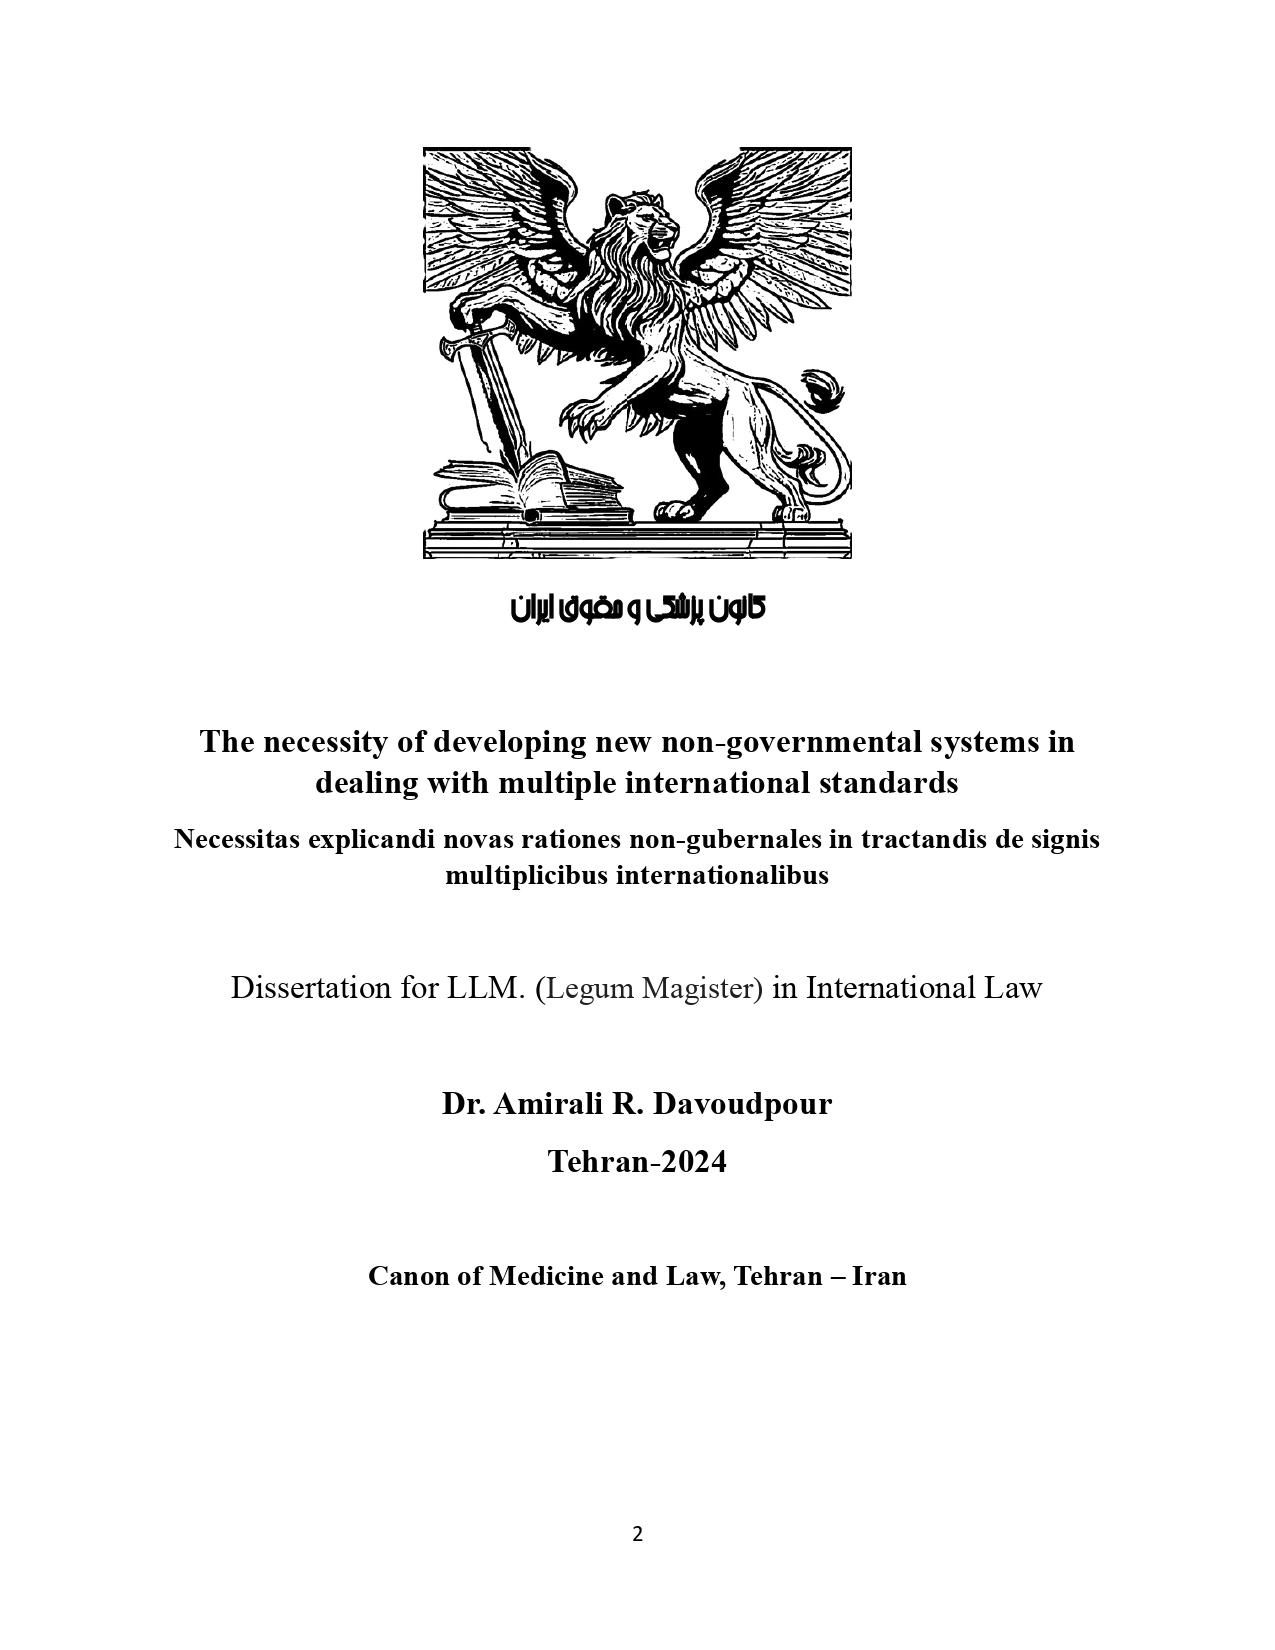 The necessity of developing new non-governmental systems in dealing with multiple international standards, Amirali R. Davoudpour, Dissertation for LLM. (Legum Magister) in International Law.